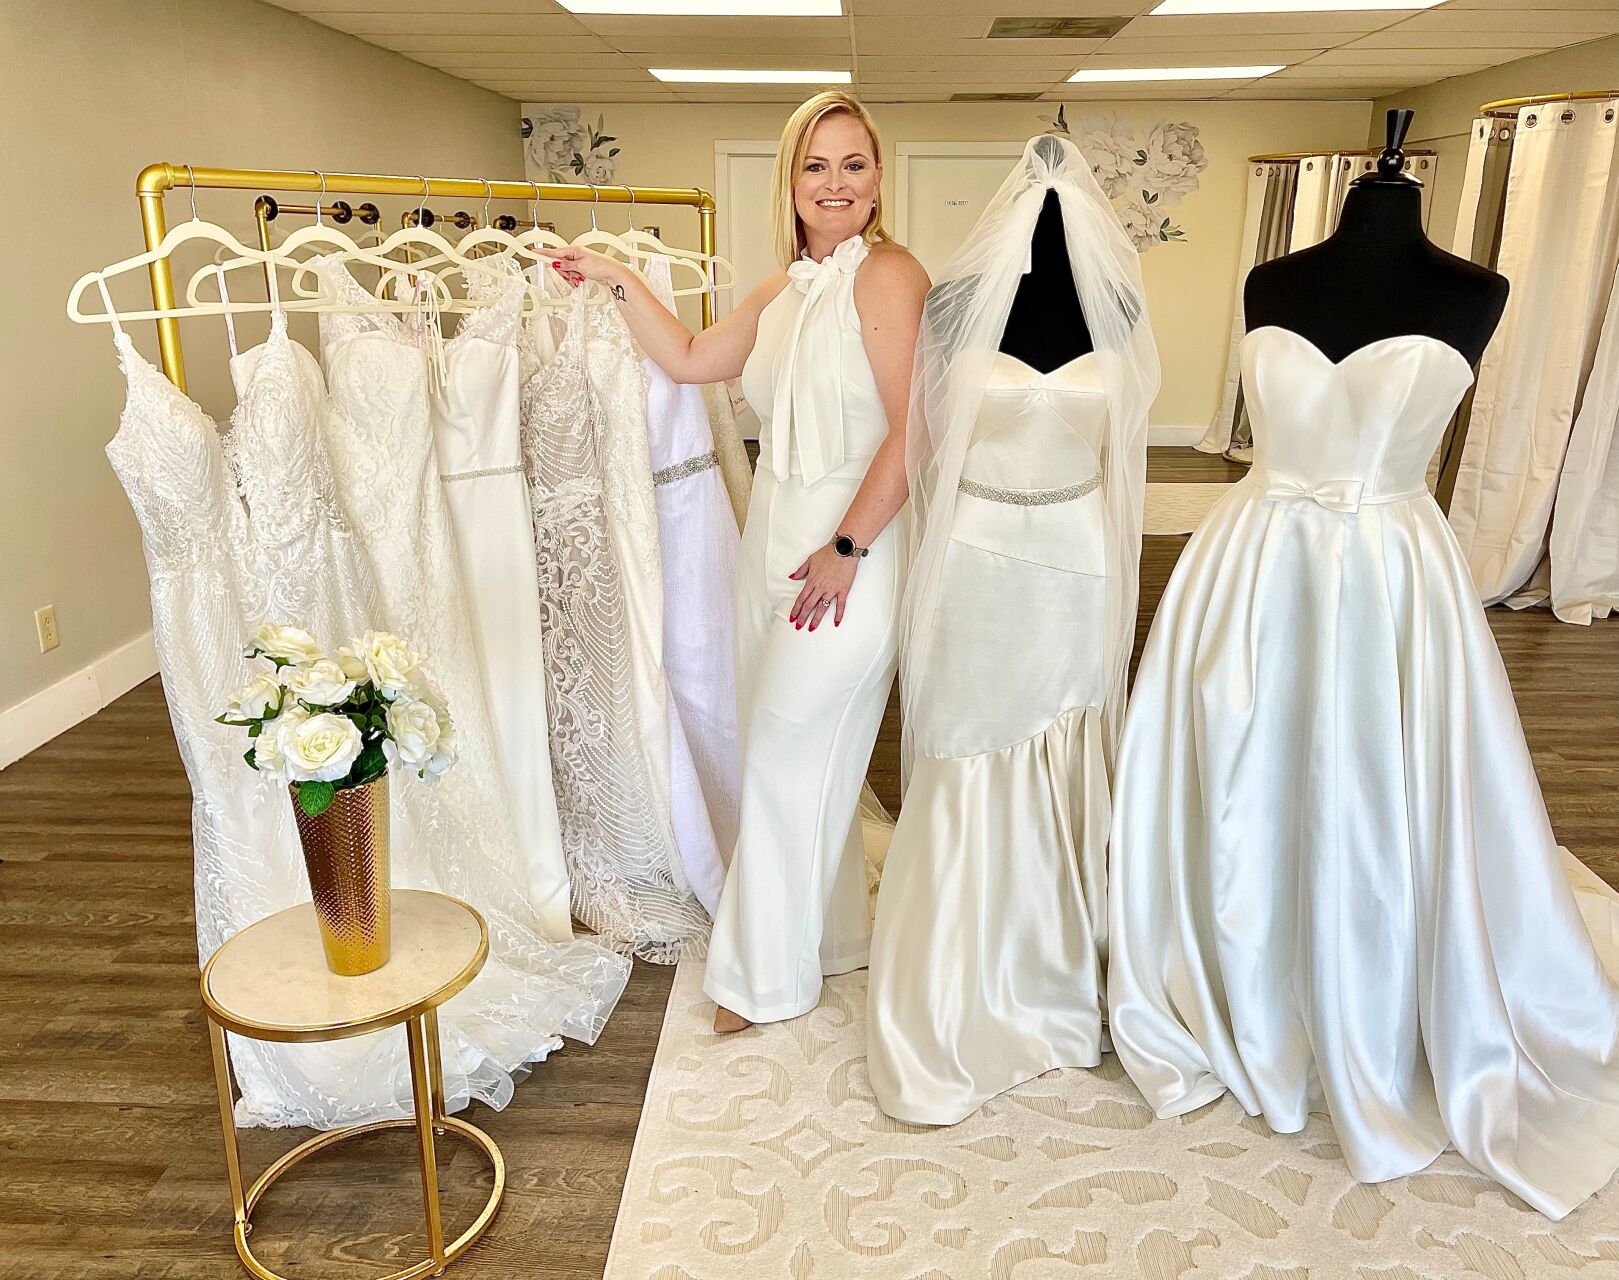 Bridal Consignment Pop-up | The Alter Market